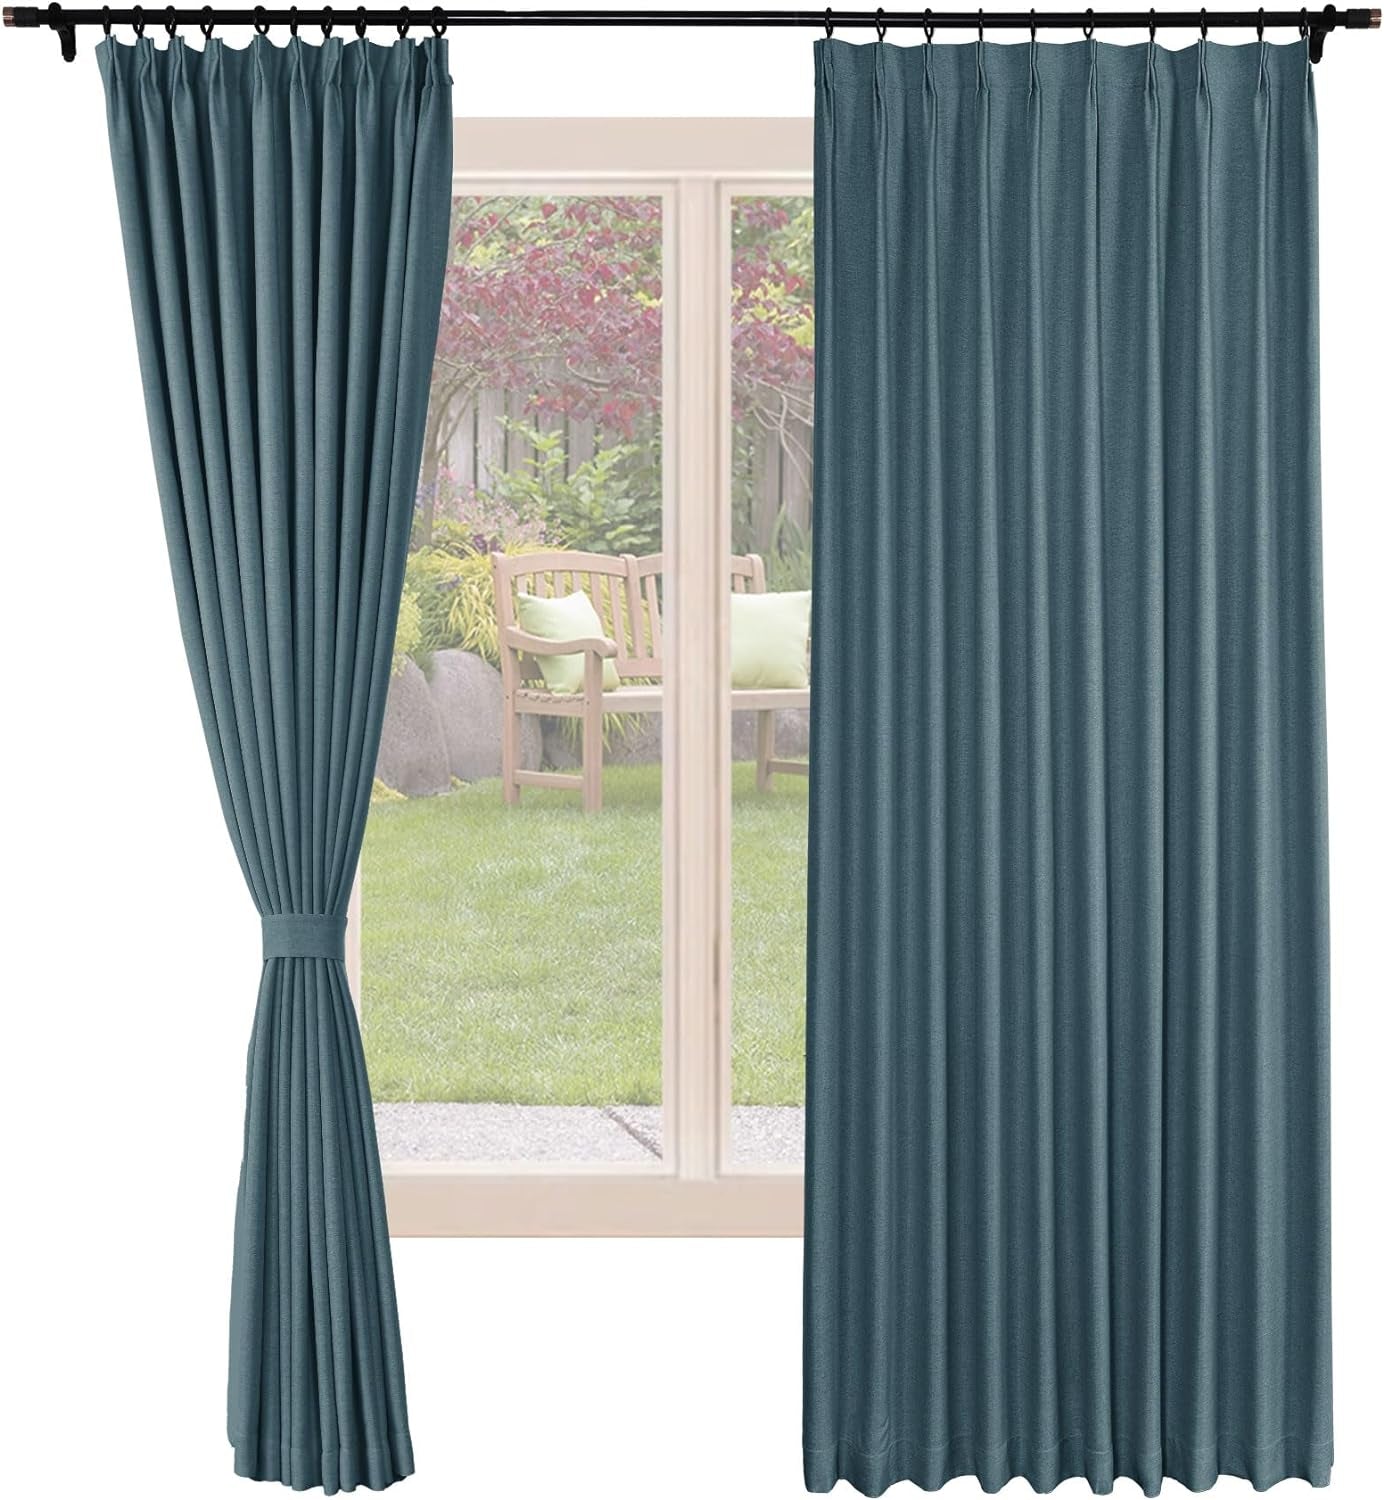 Frelement Blackout Curtains Natural Linen Curtains Pinch Pleat Drapery Panels for Living Room Thermal Insulated Curtains, 52" W X 63" L, 2 Panels, Oasis  Frelement 20 Dark Blue (52Wx84L Inch)*2 